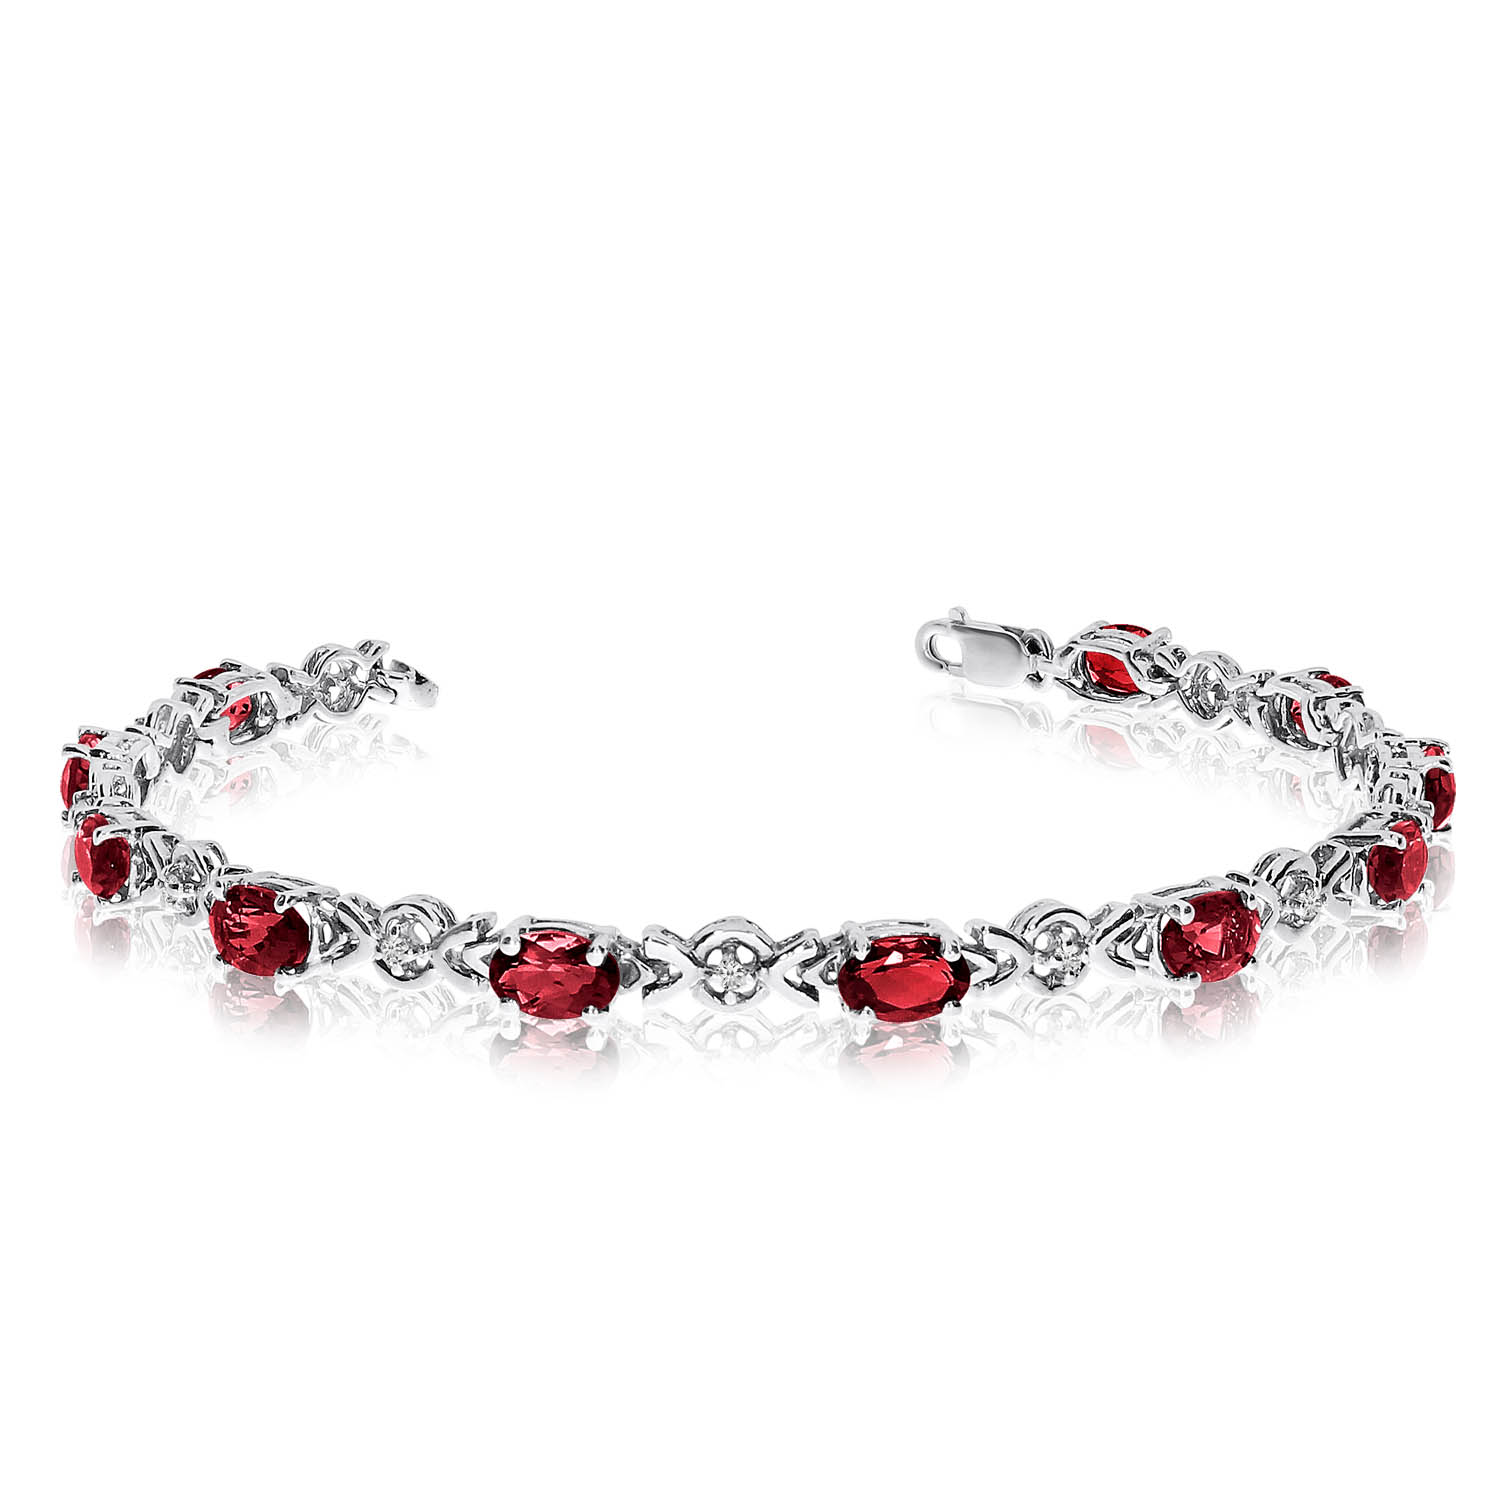 This 10k white gold oval garnet and diamond bracelet features eleven 6x4 mm stunning natural garn...